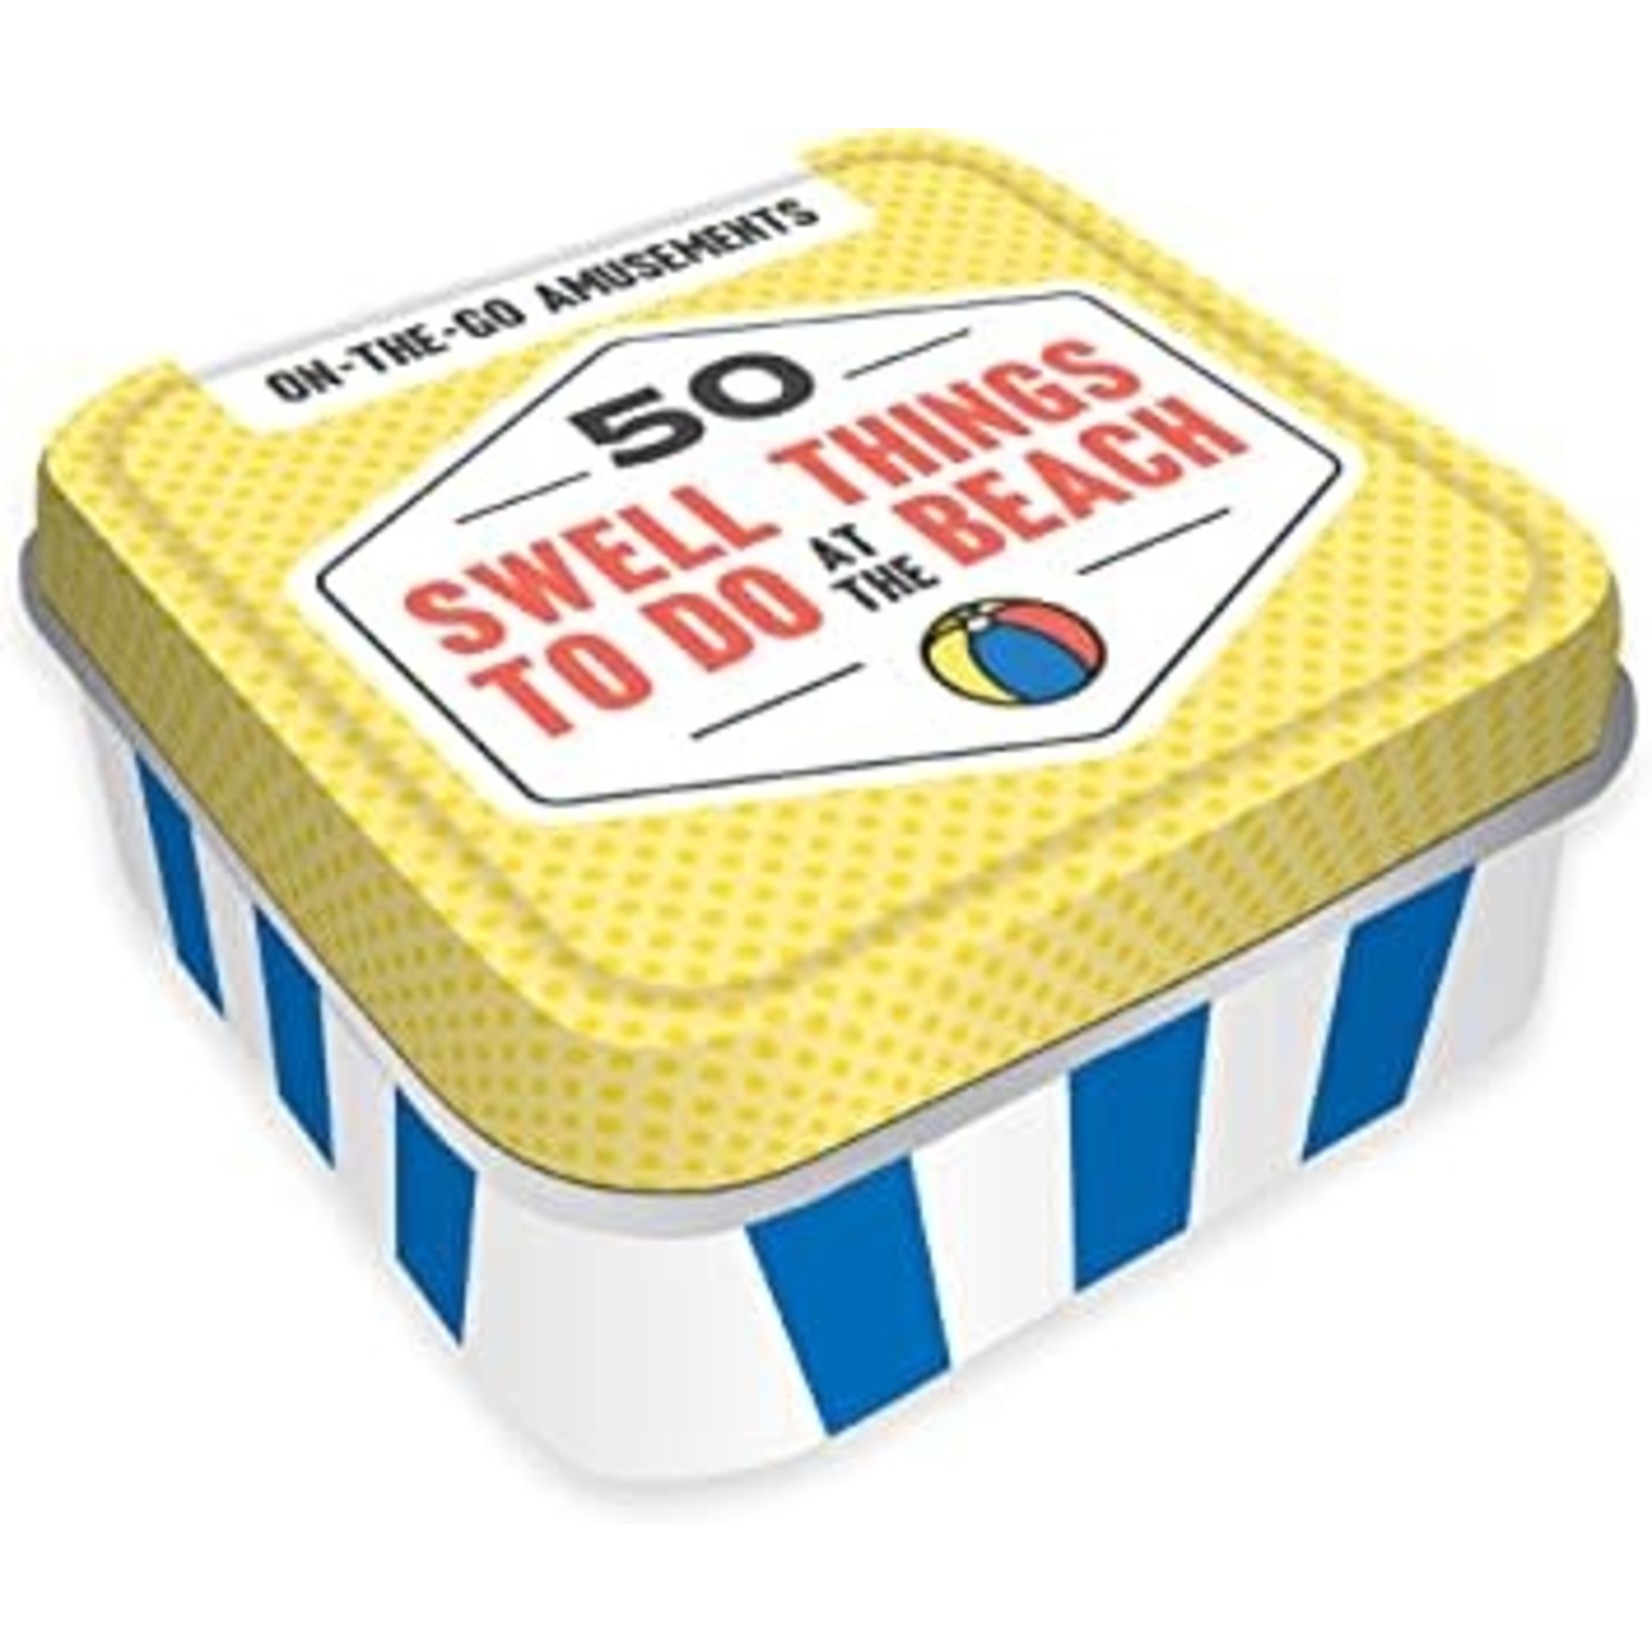 Hachette Books 50 Swell Things to Do at the Beach